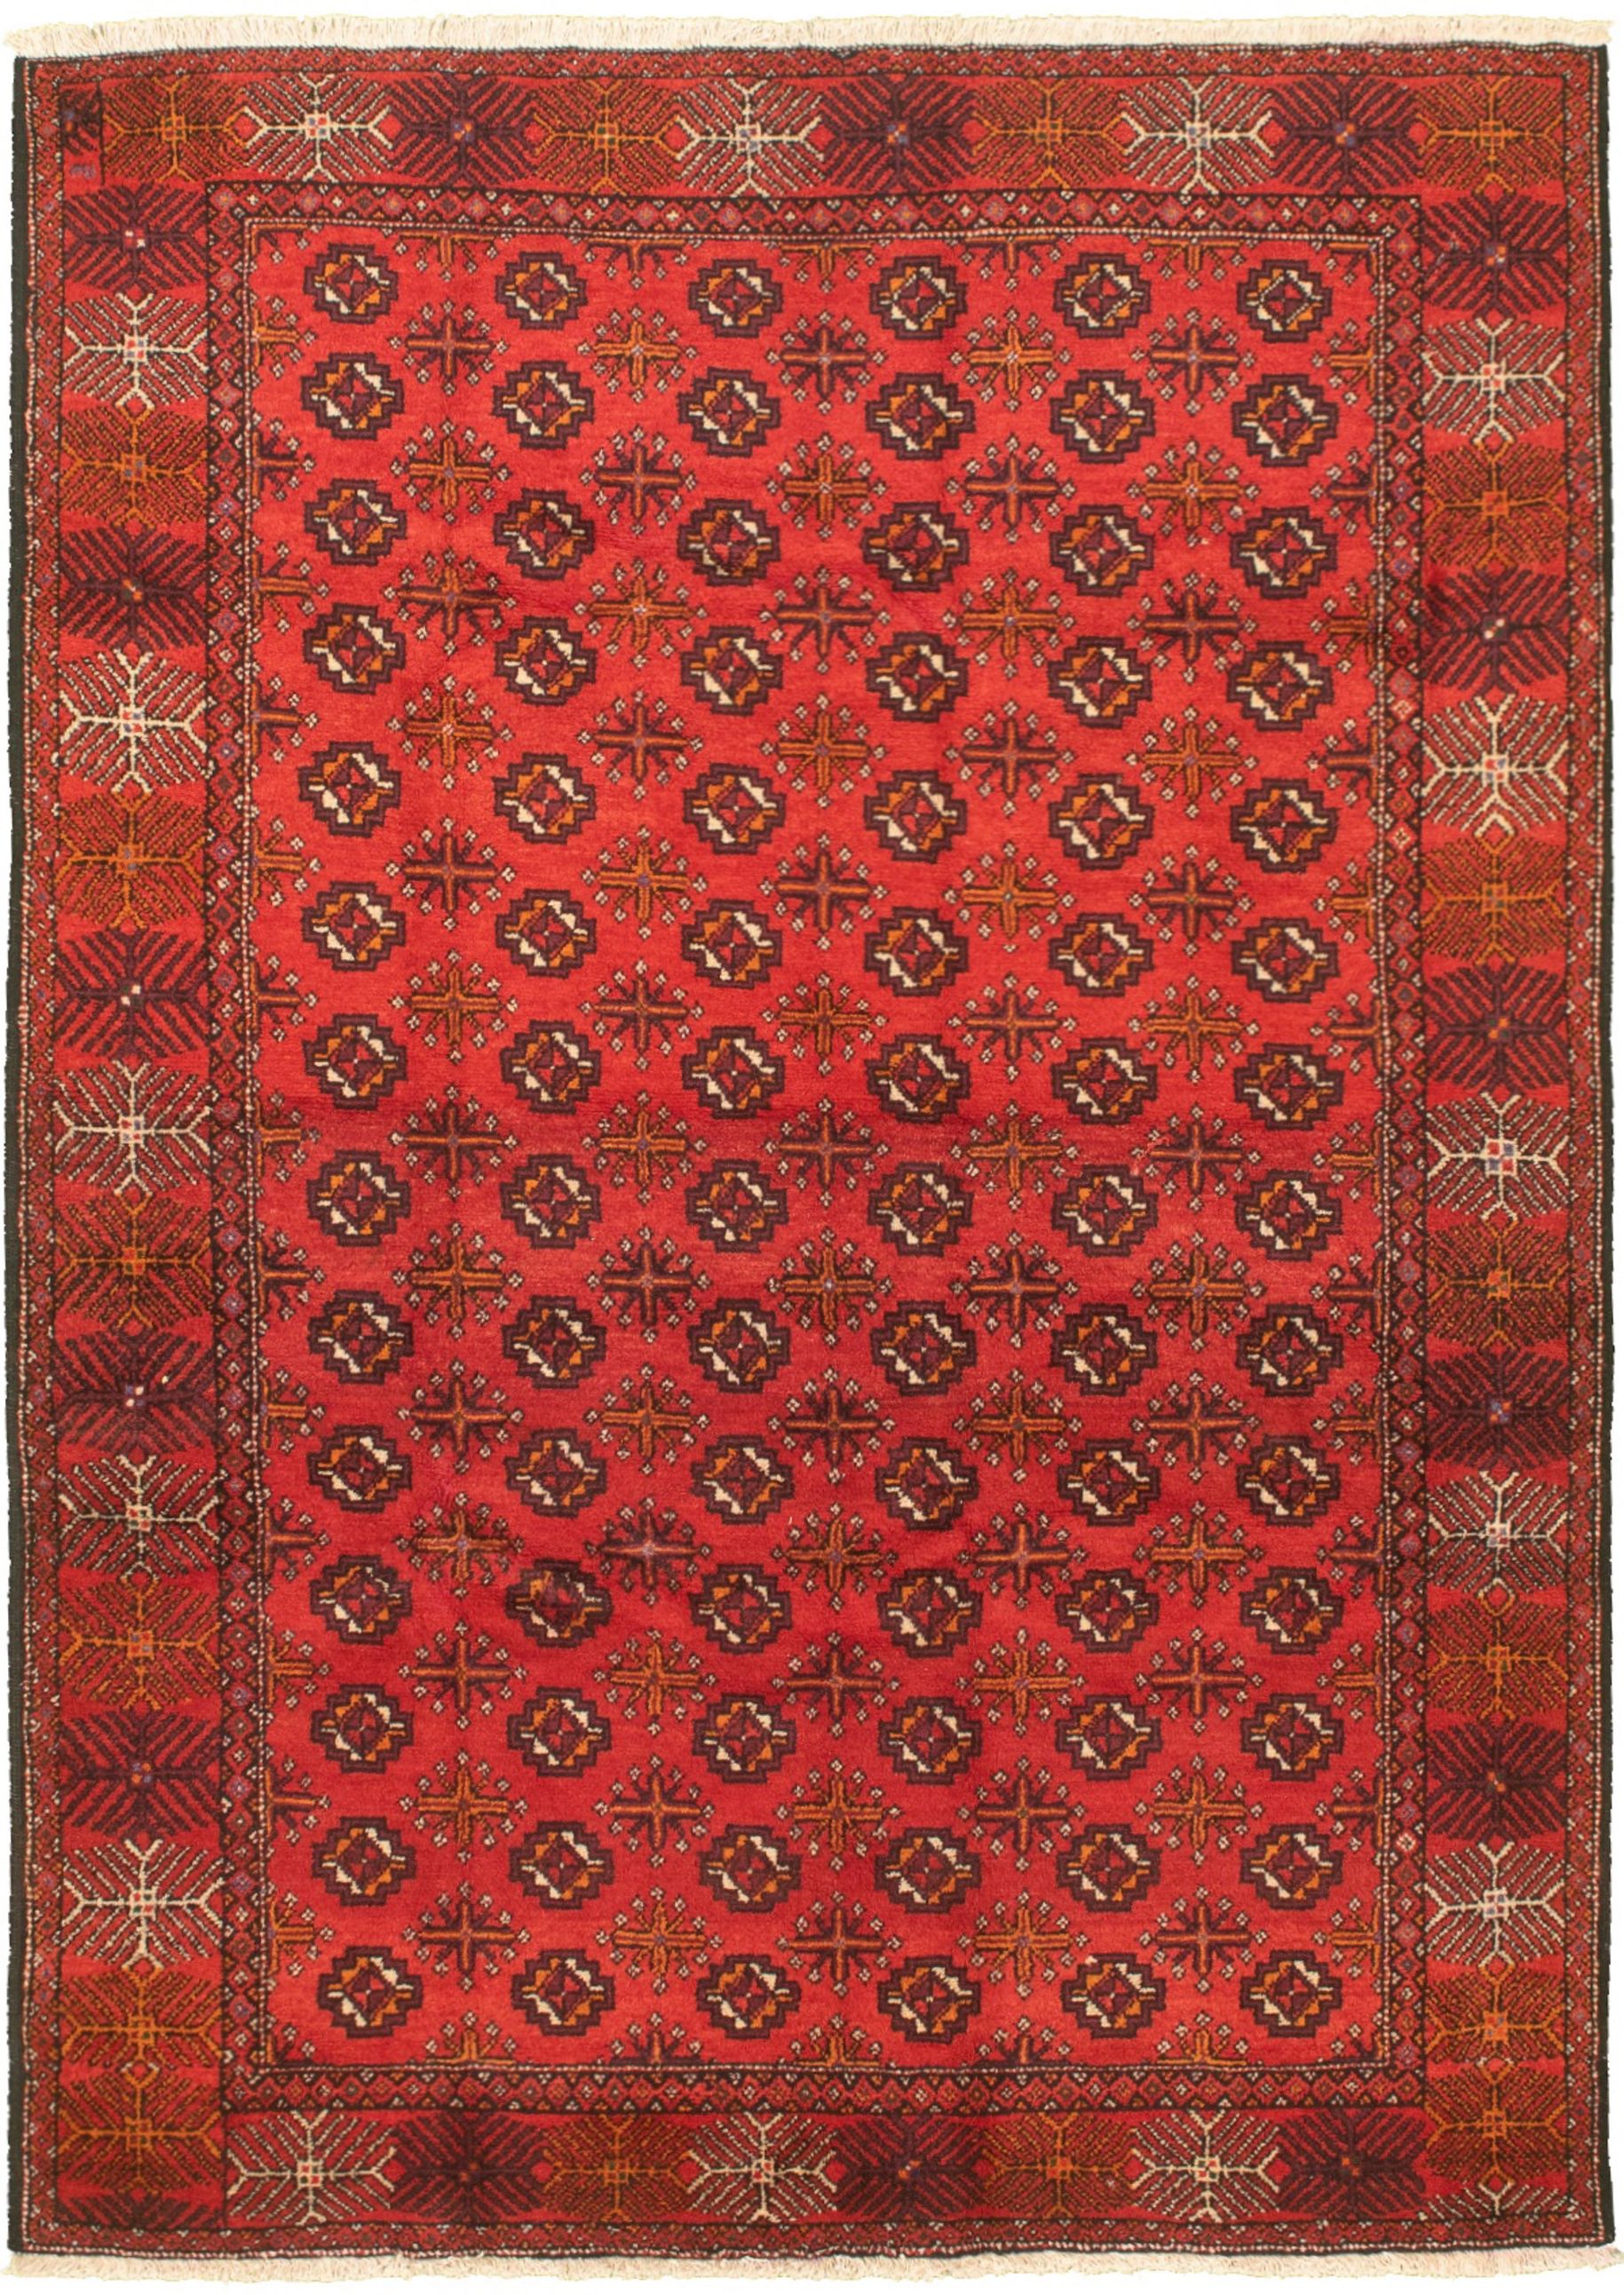 Hand-knotted Authentic Turkish Red Wool Rug 5'4" x 7'10" Size: 5'4" x 7'10"  